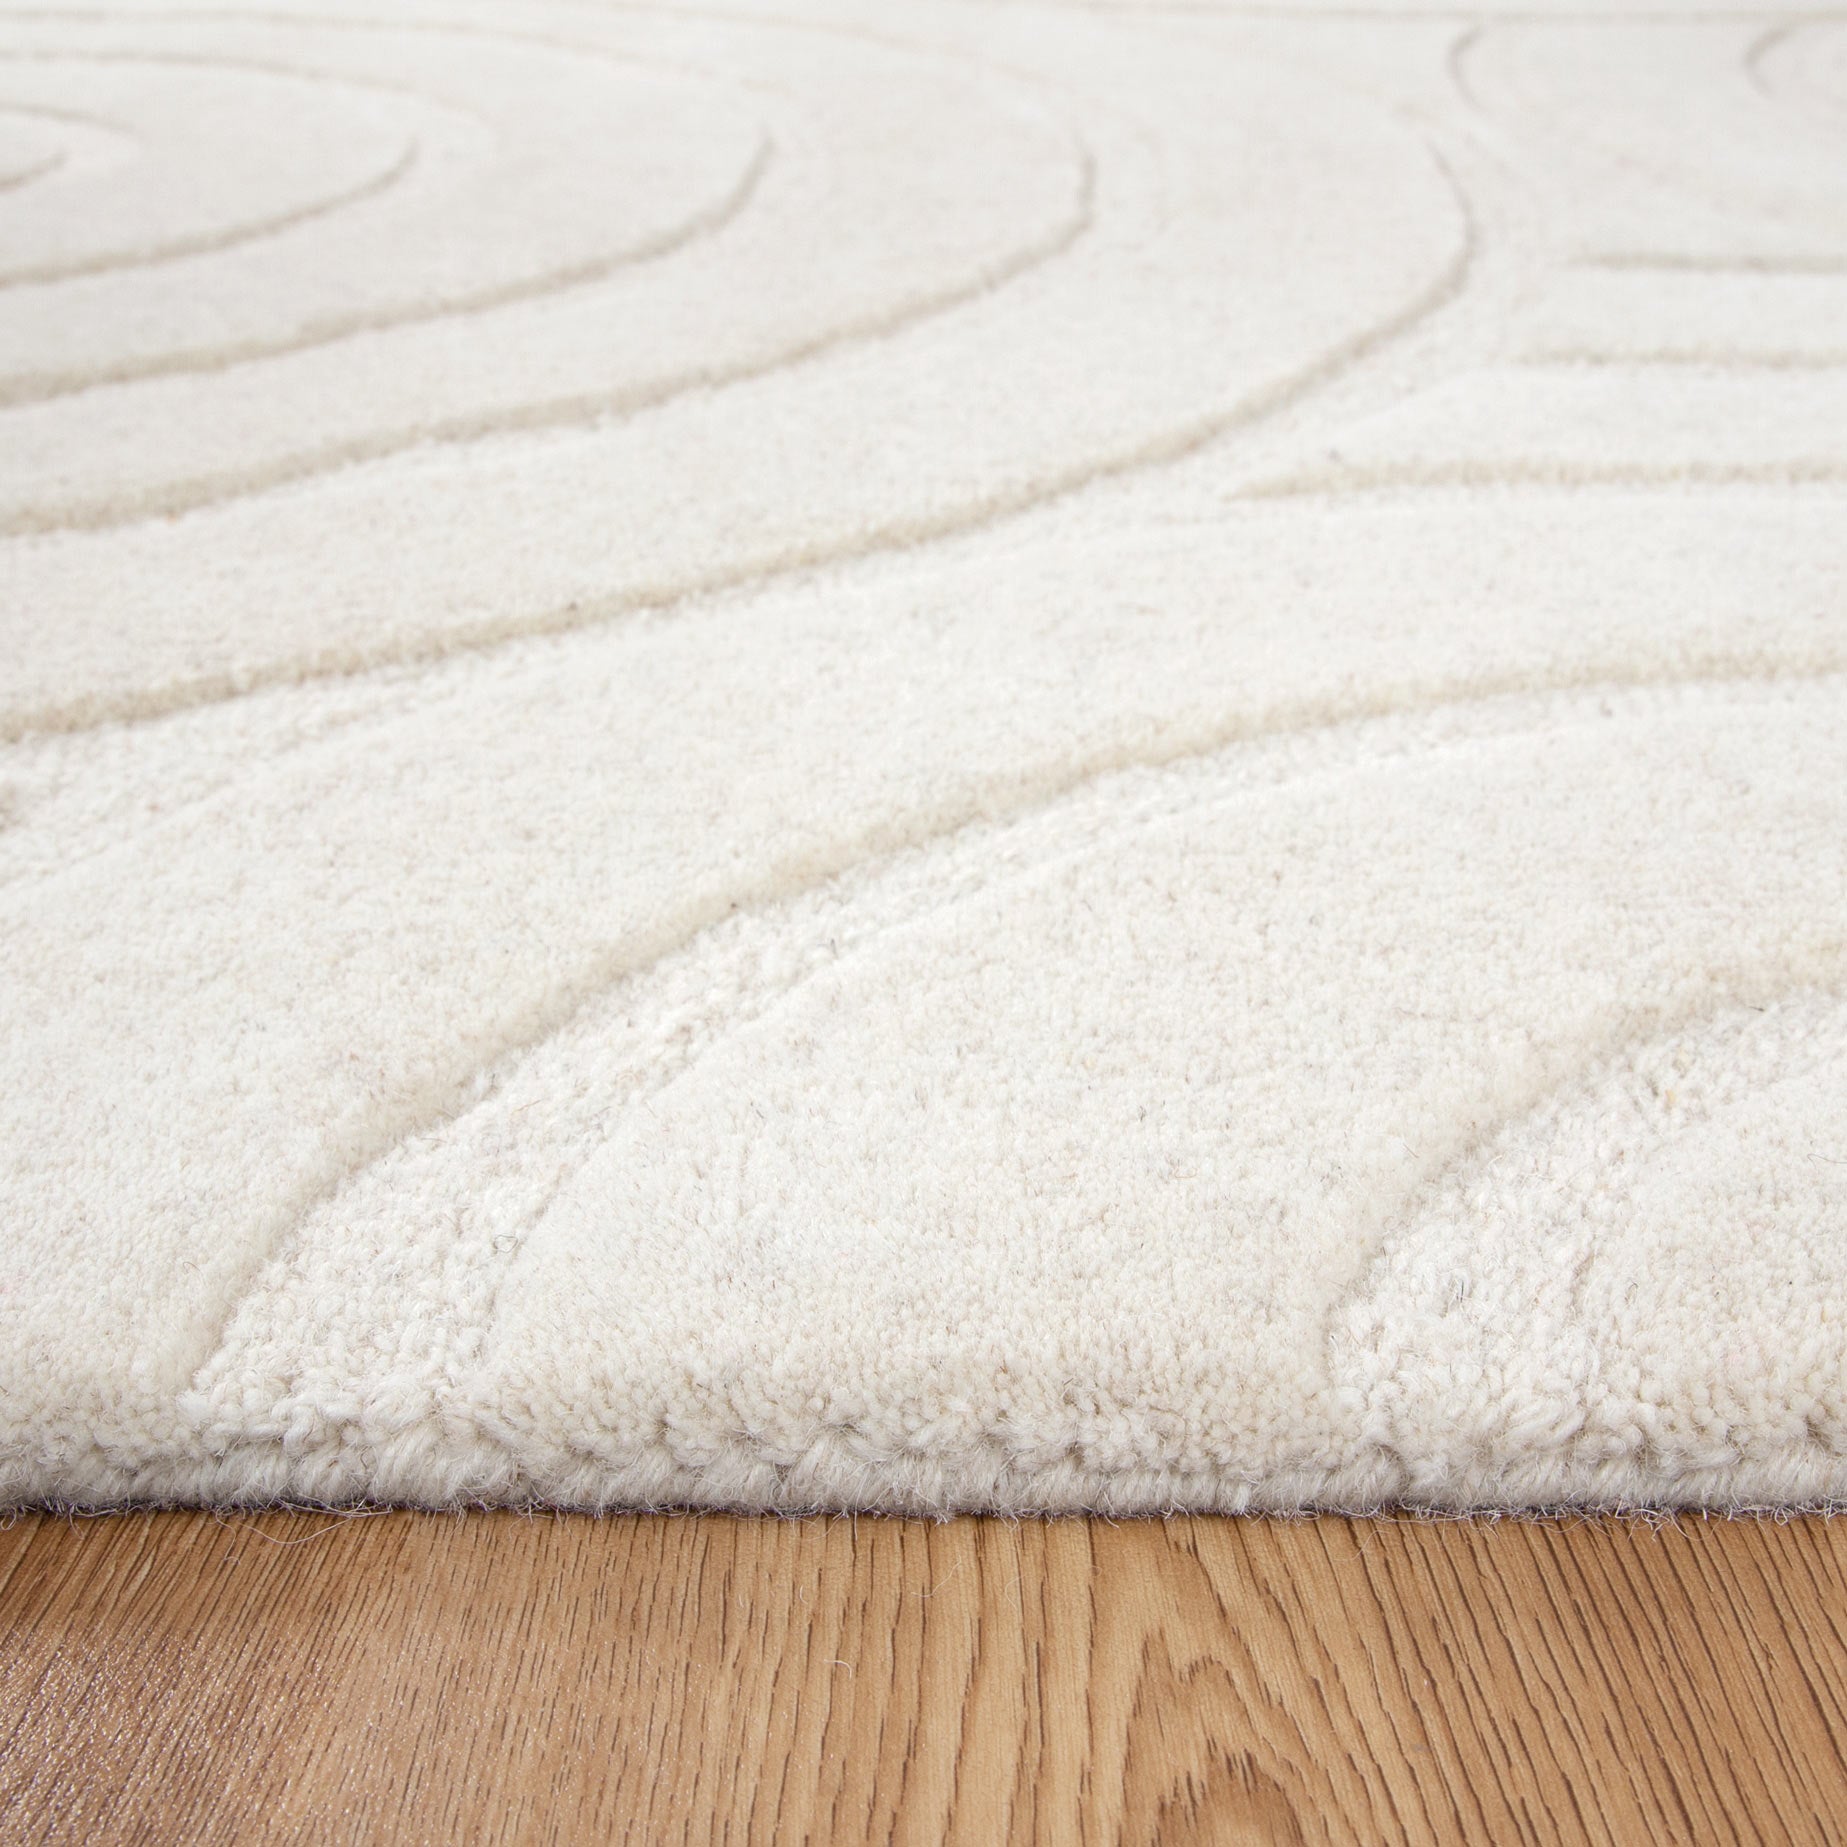 Plush wool pile of the Ellipse Cream Wool Rug | Simple Style Co